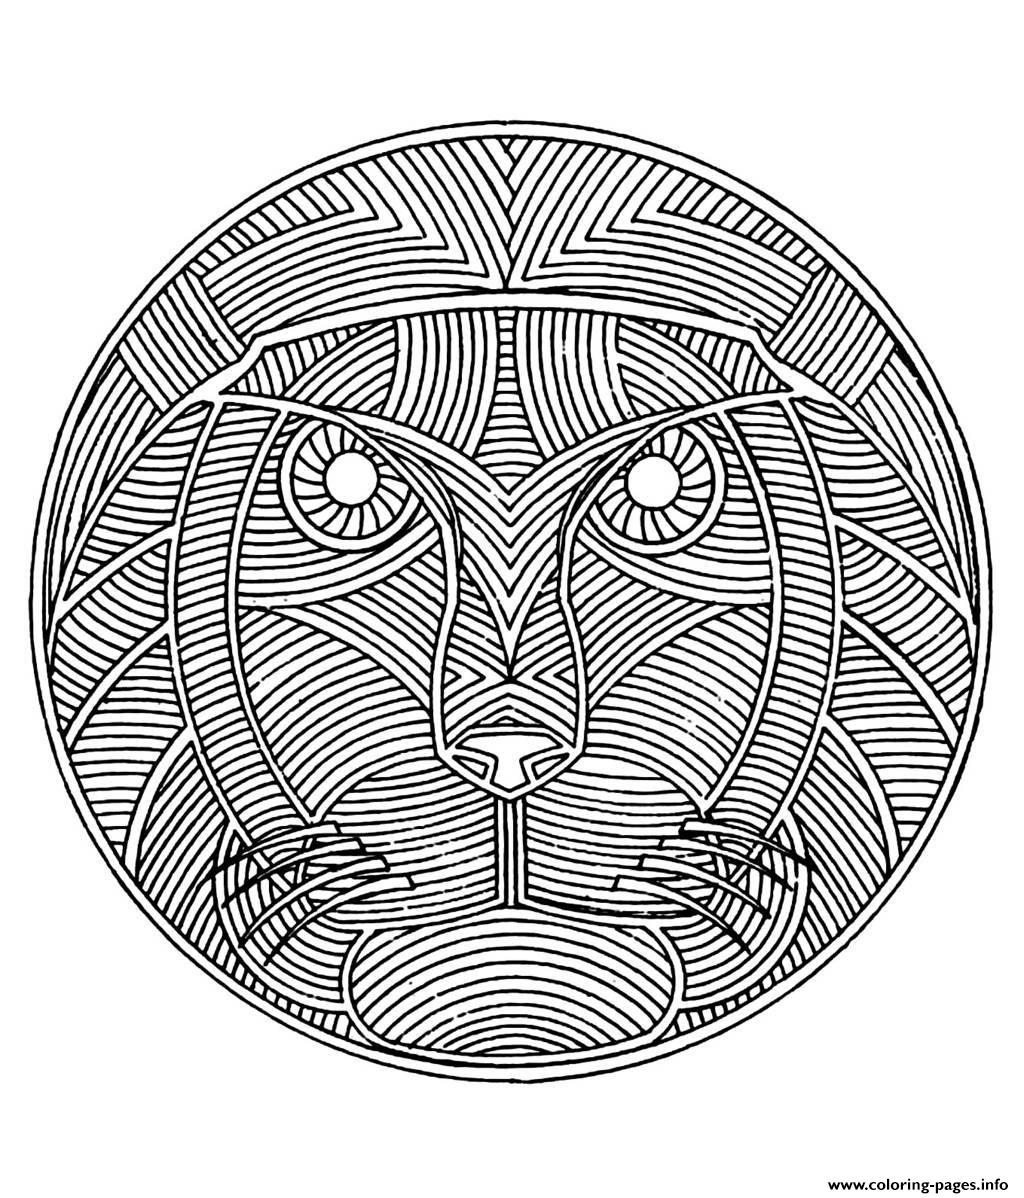 Print free mandala difficult adult to print lion Coloring pages